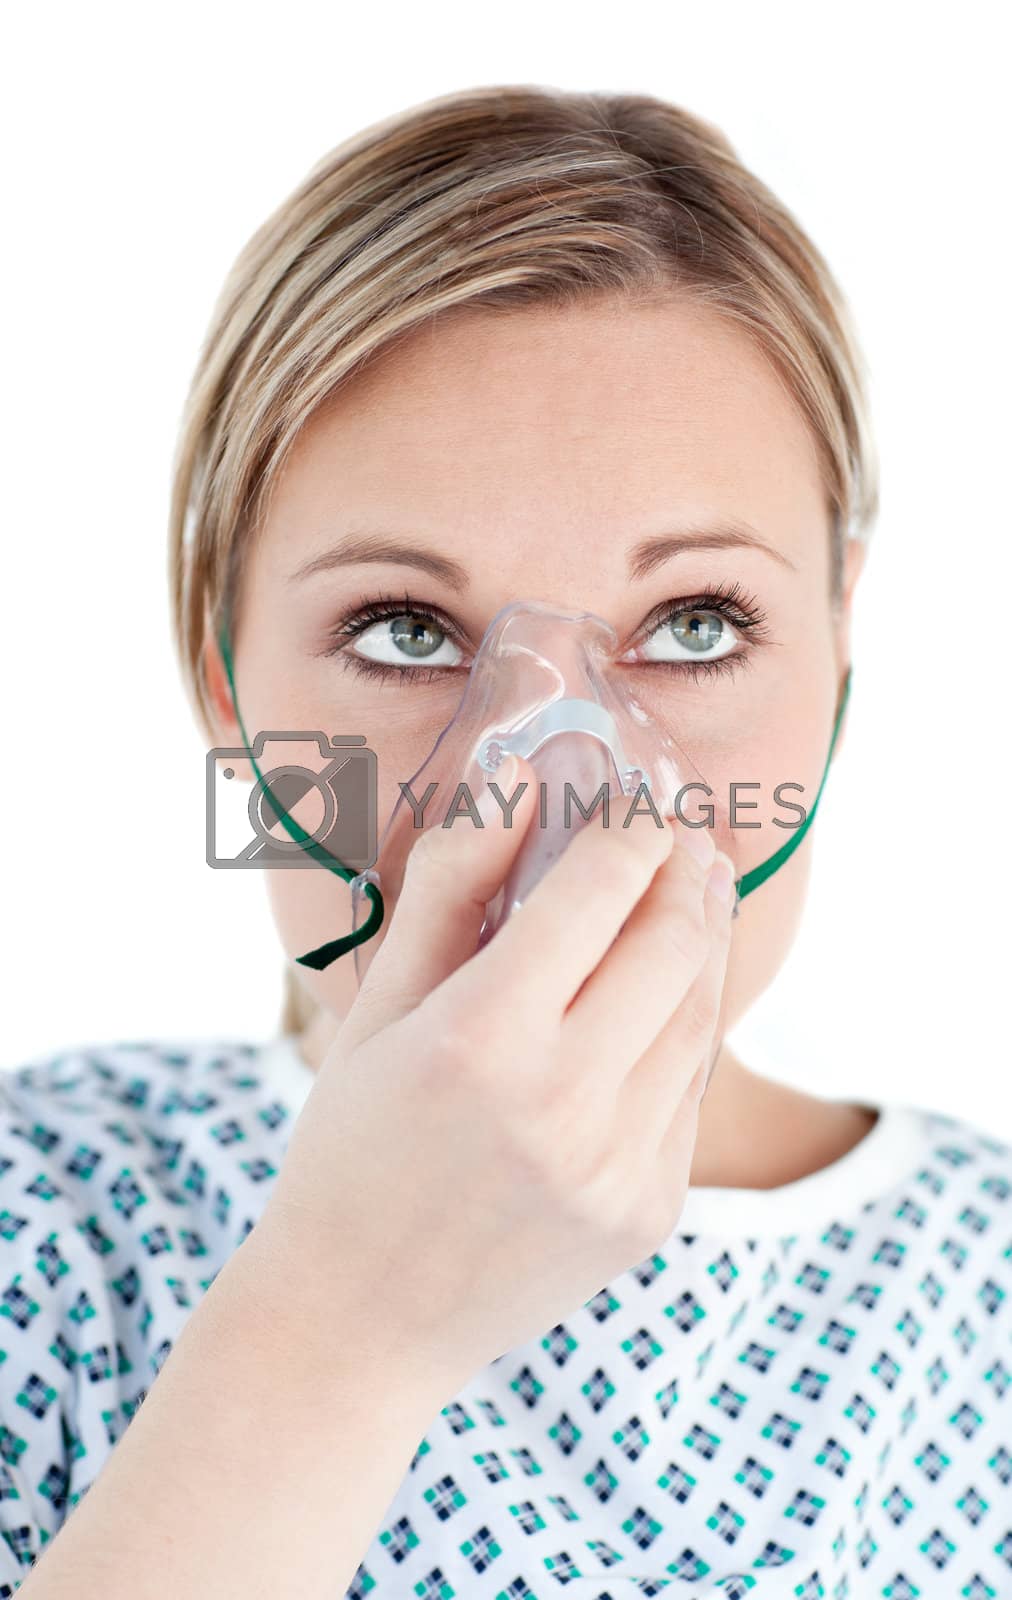 Royalty free image of An unhealthy woman with oxygen mask by Wavebreakmedia